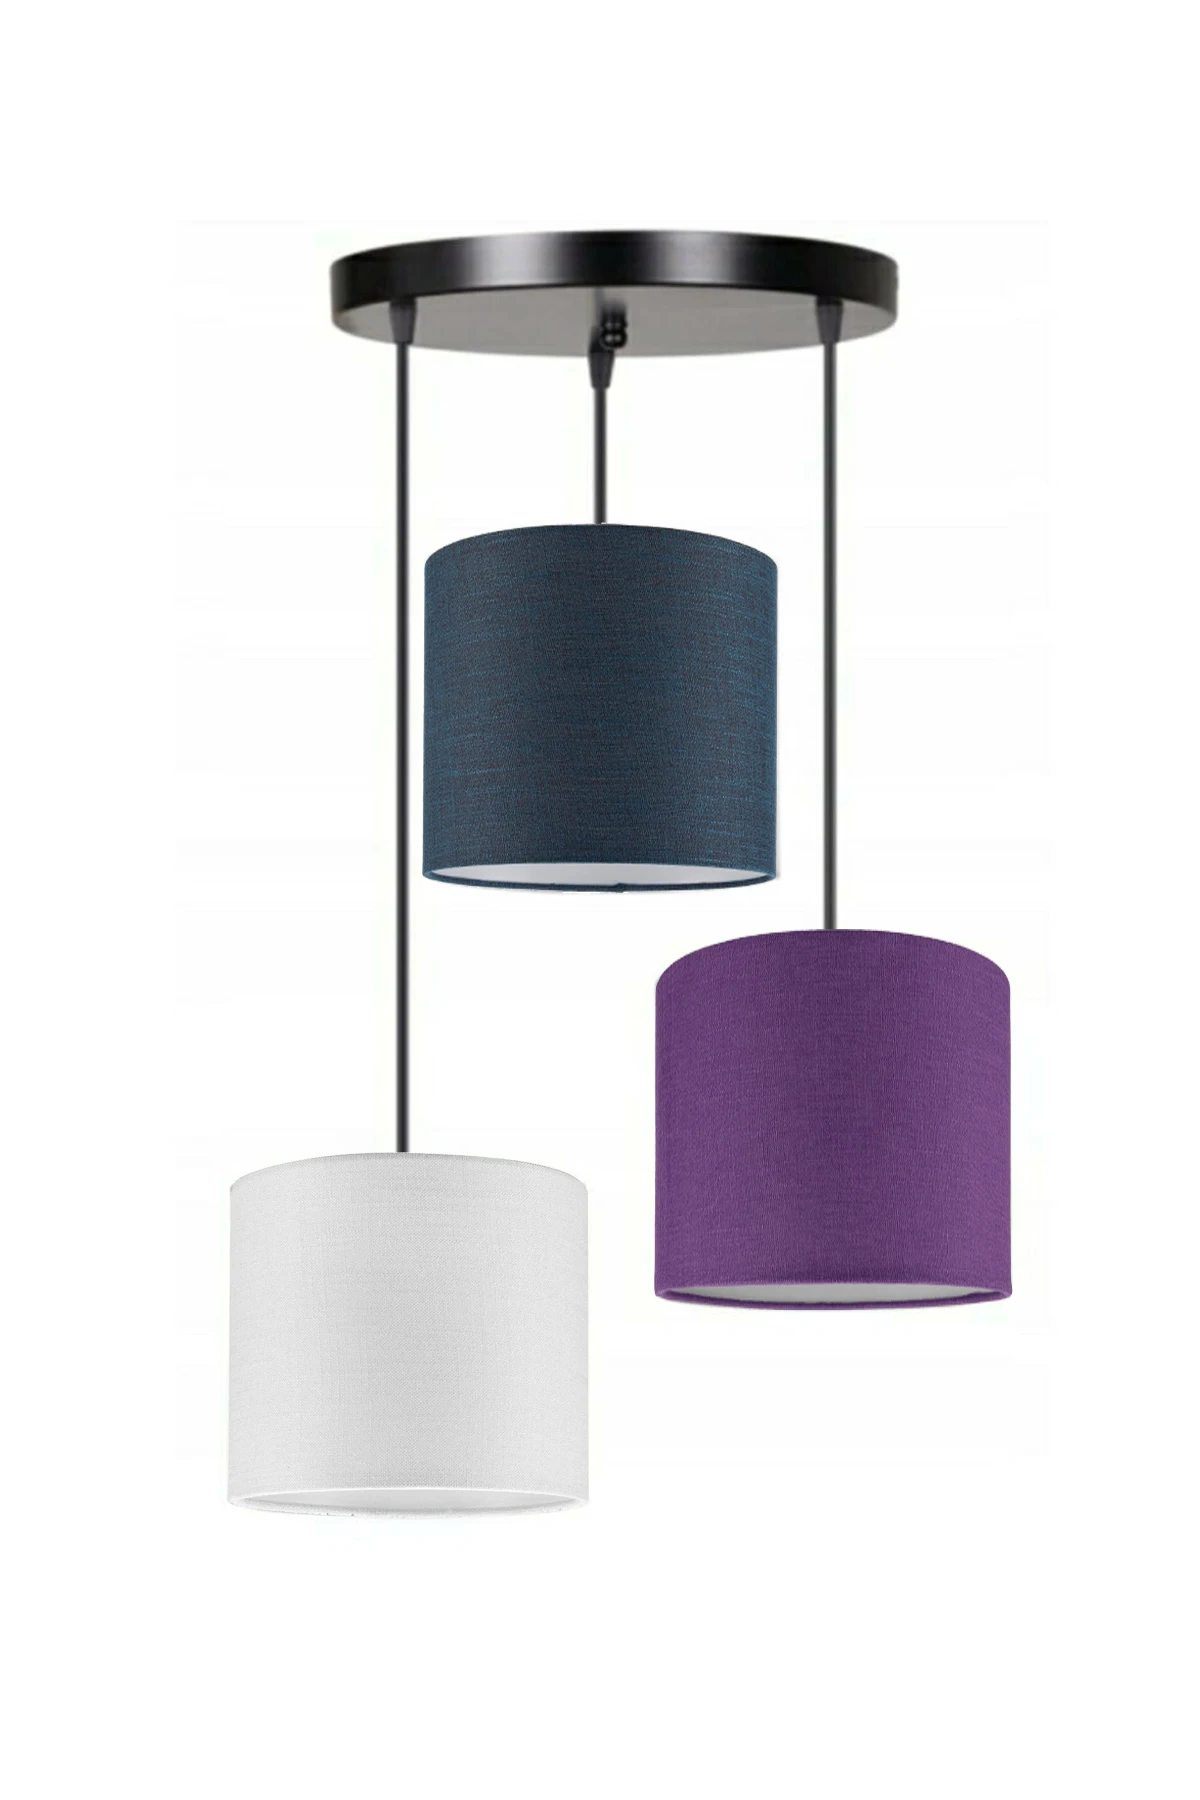 3 Heads White Navy Blue Purple Cylinder Fabric Lampshade Pendant Lamp Chandelier Modern Decorative Design For Home Hotel Office